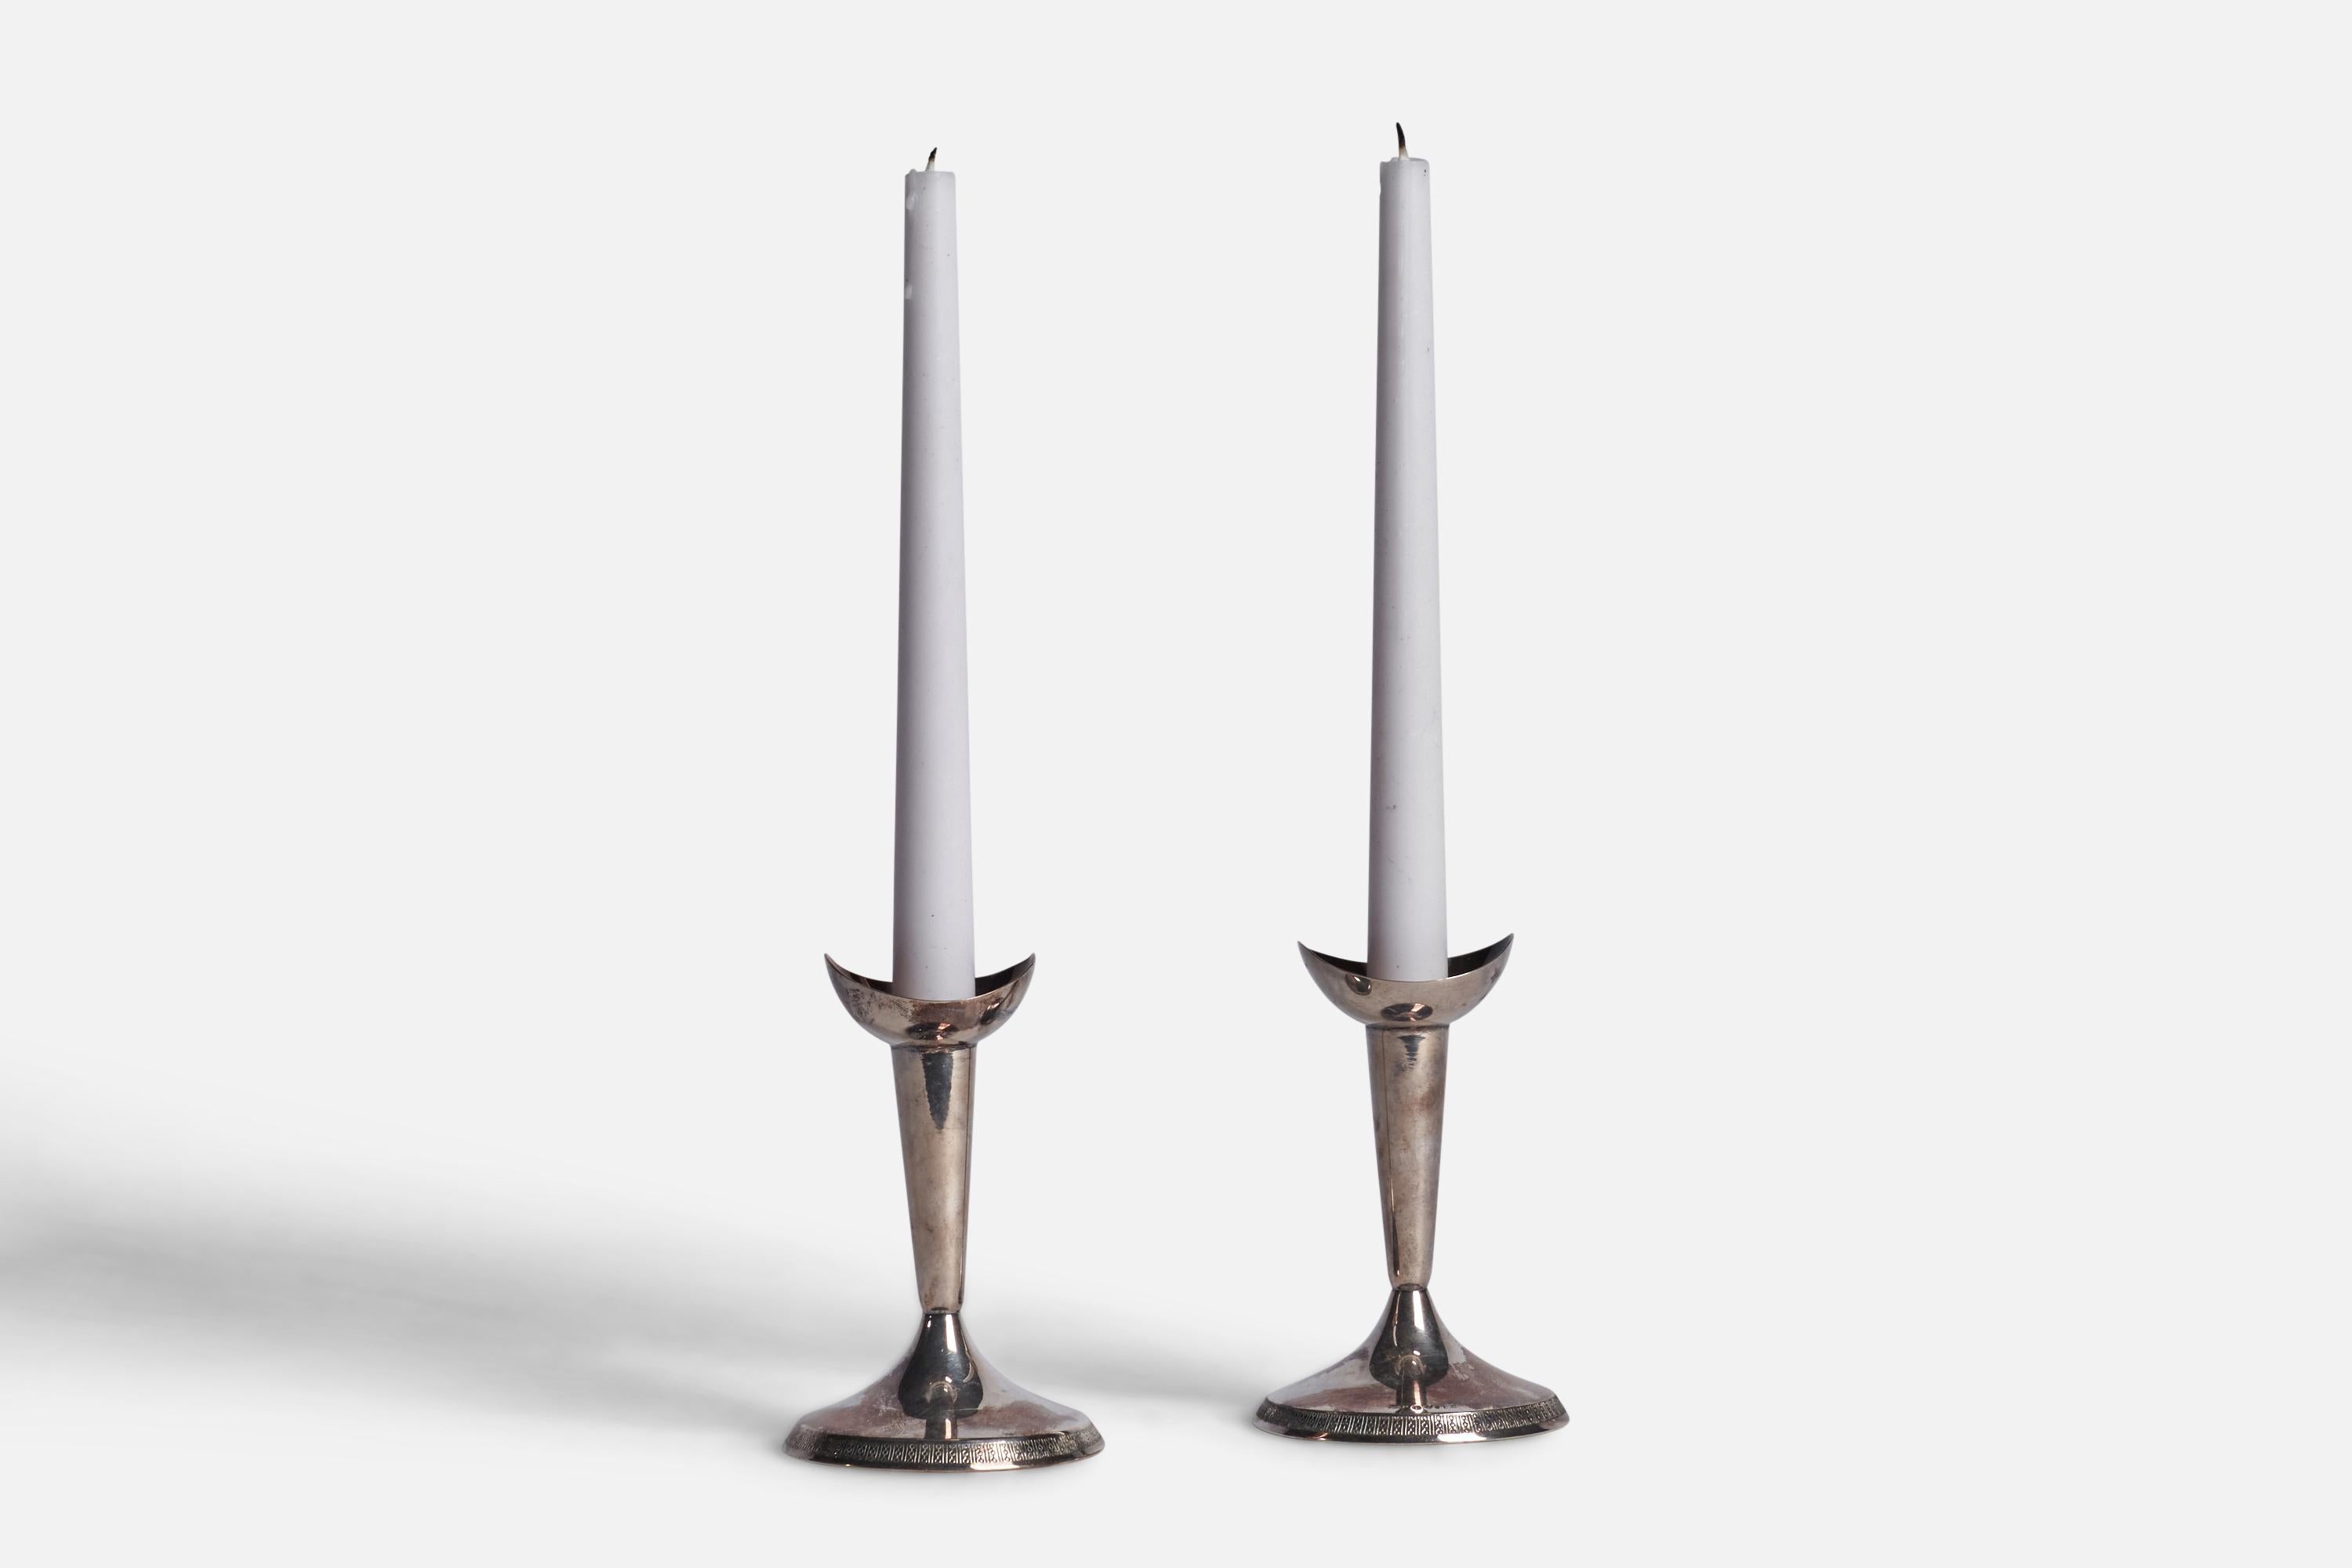 A pair of sterling silver candlesticks designed and produced by GAB Guldsmedsaktiebolaget, Sweden, 1930s.

fits 0.80” diameter candles